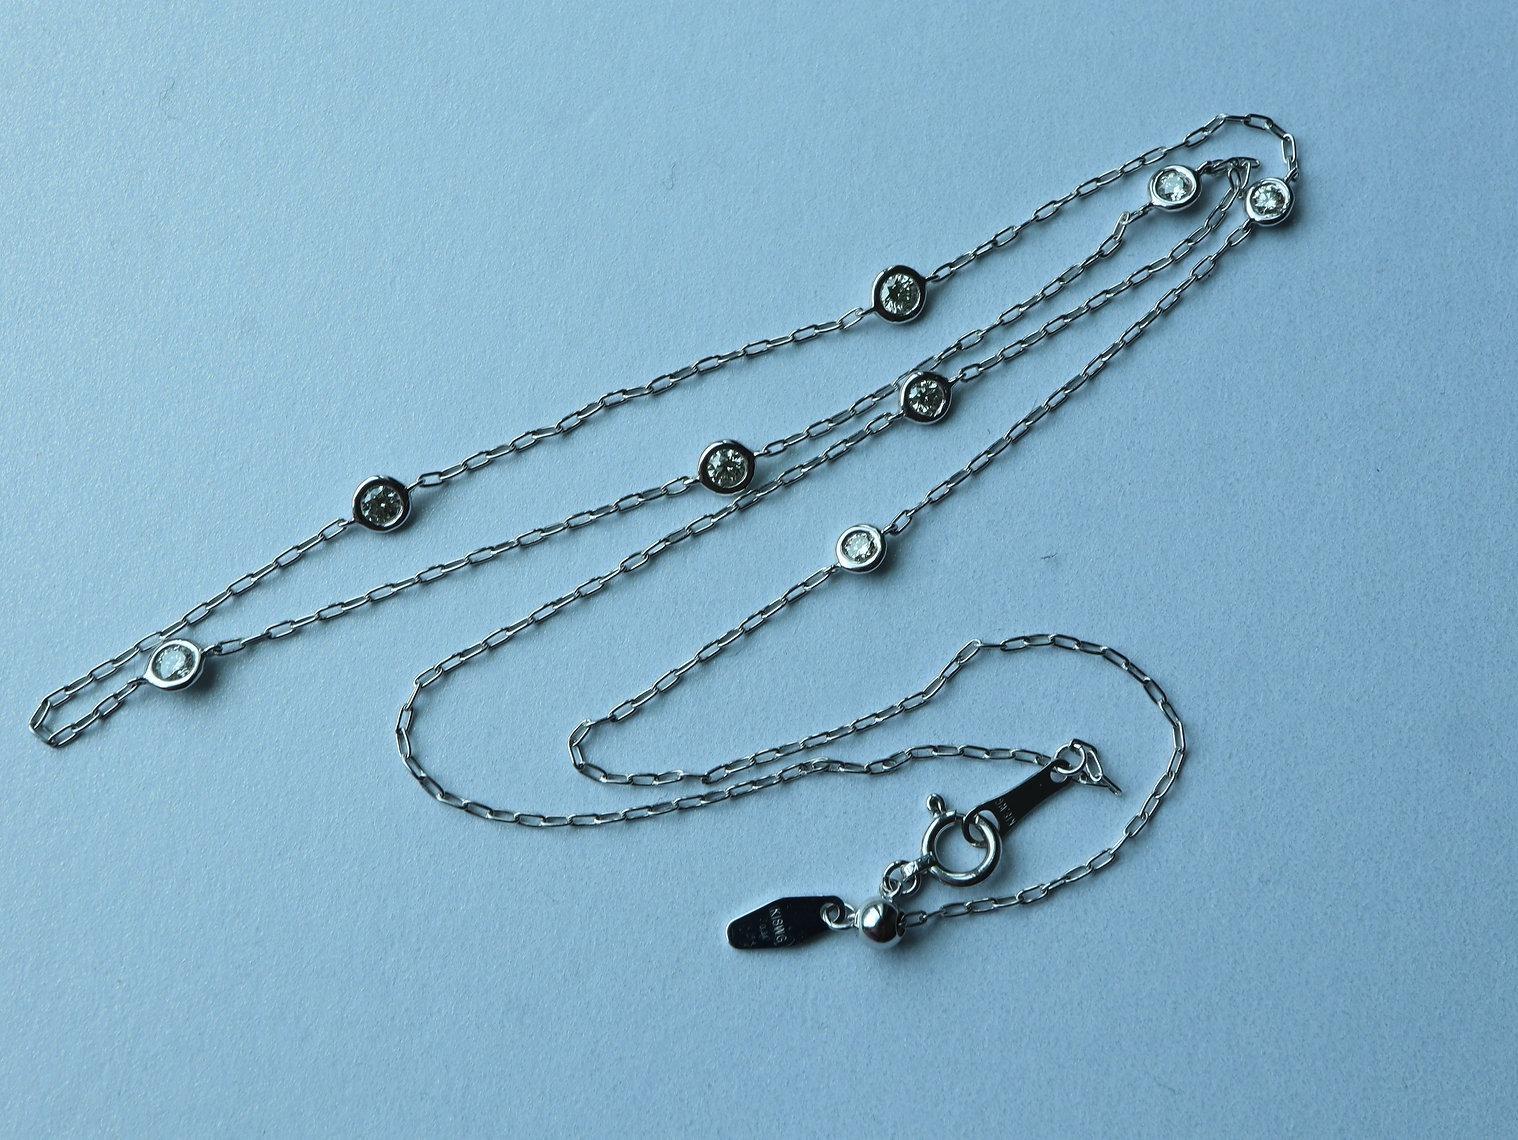 
This simple minimalist design includes 8 natural diamonds that float around the neck on a dainty chain. Most importantly, every single stone is an earth-mined natural diamond, Brilliant Cut, GH color, VS clarity. The length is flexible and can be